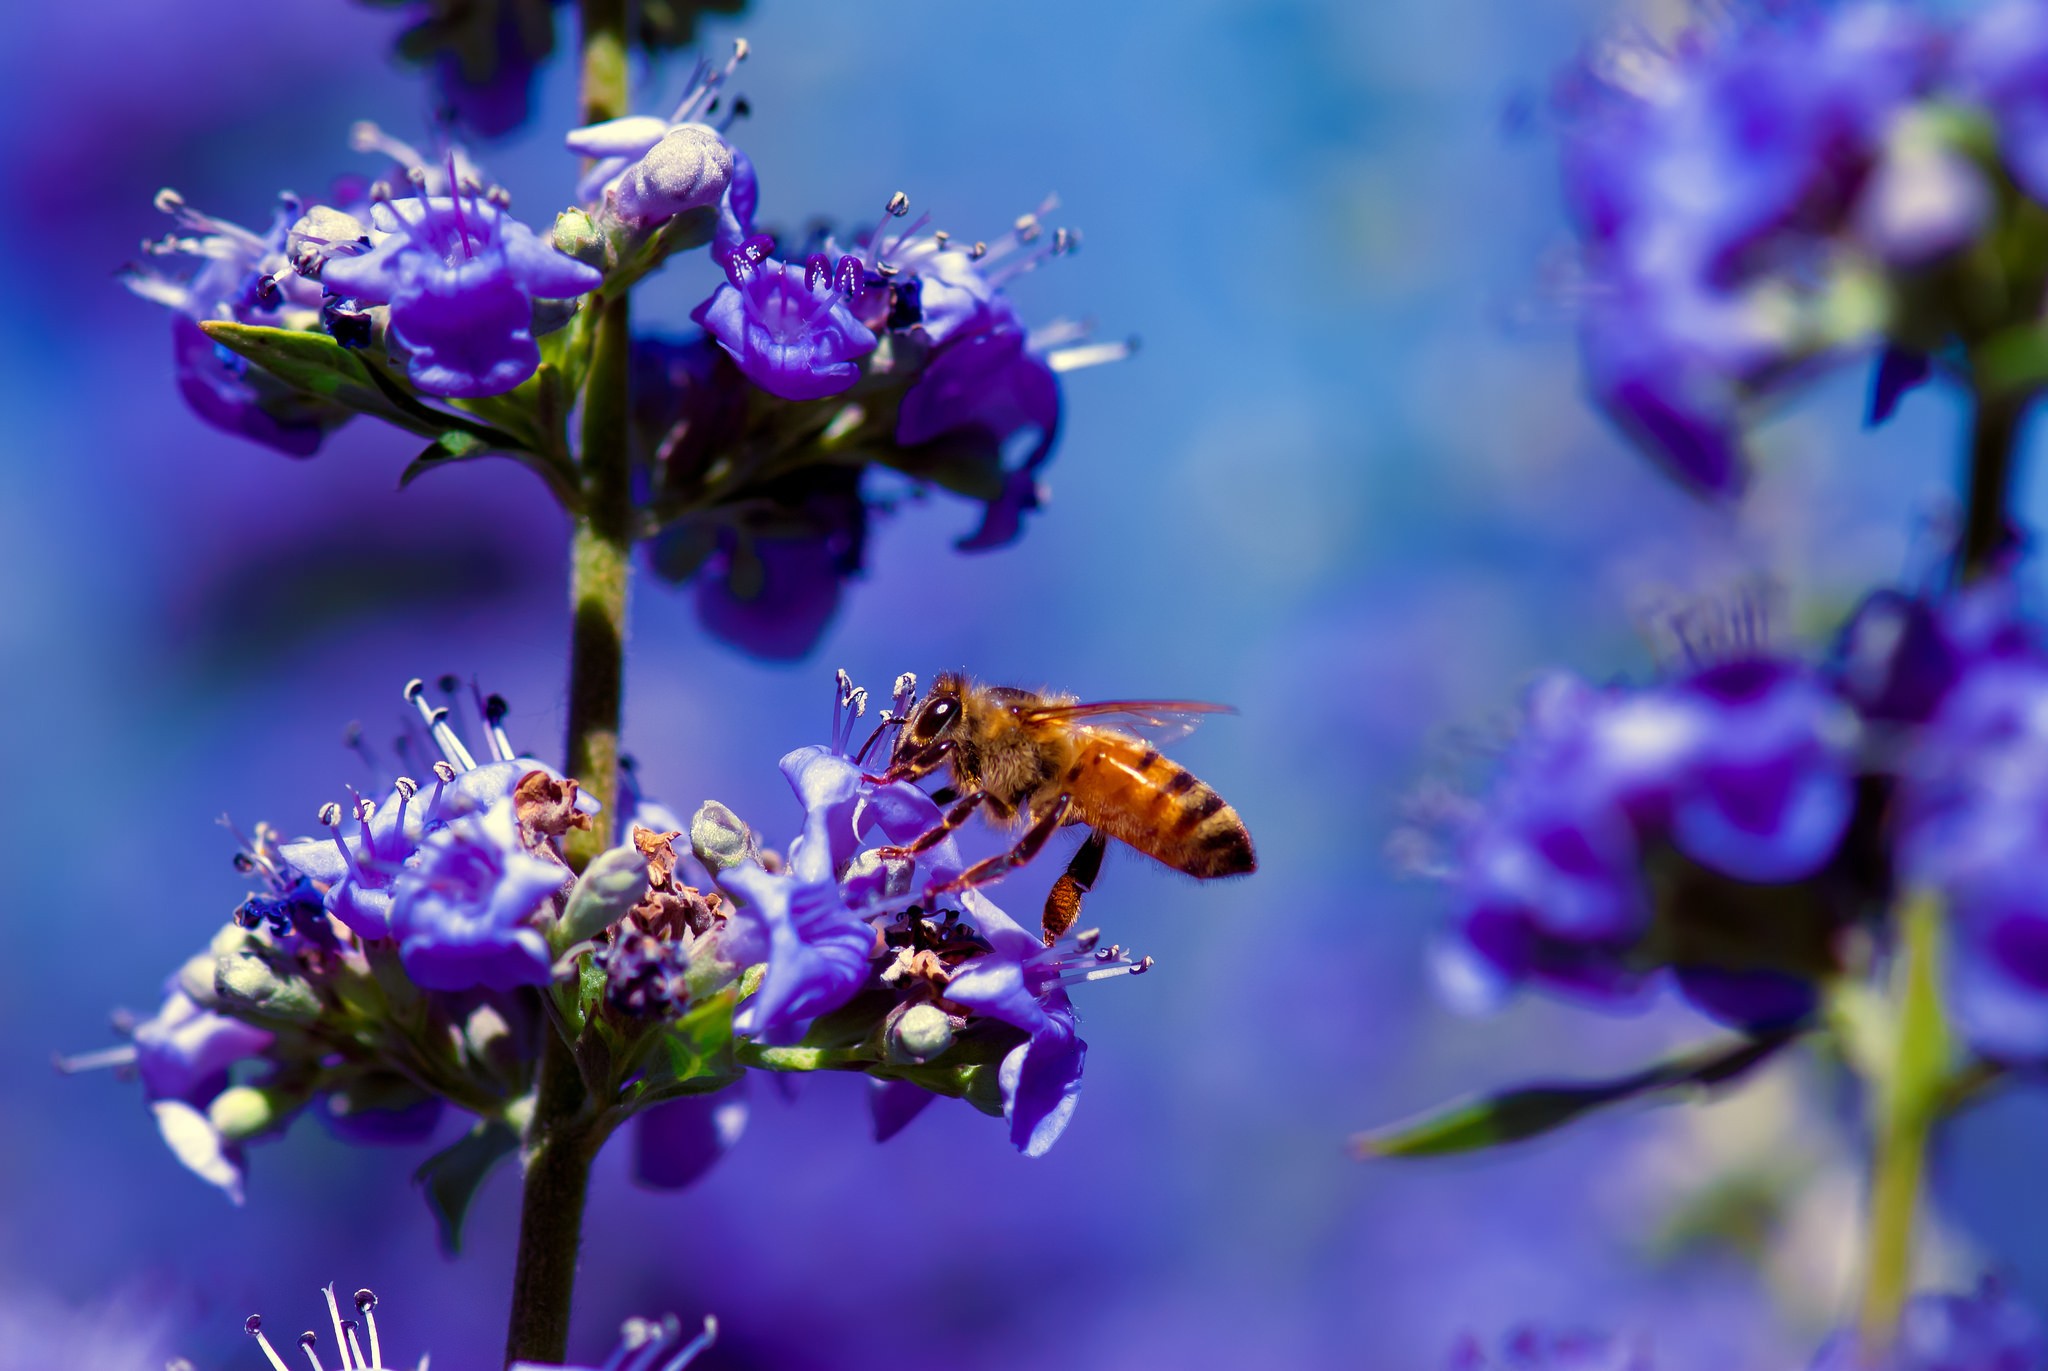 General 2048x1371 bees macro flowers plants insect animals purple flowers